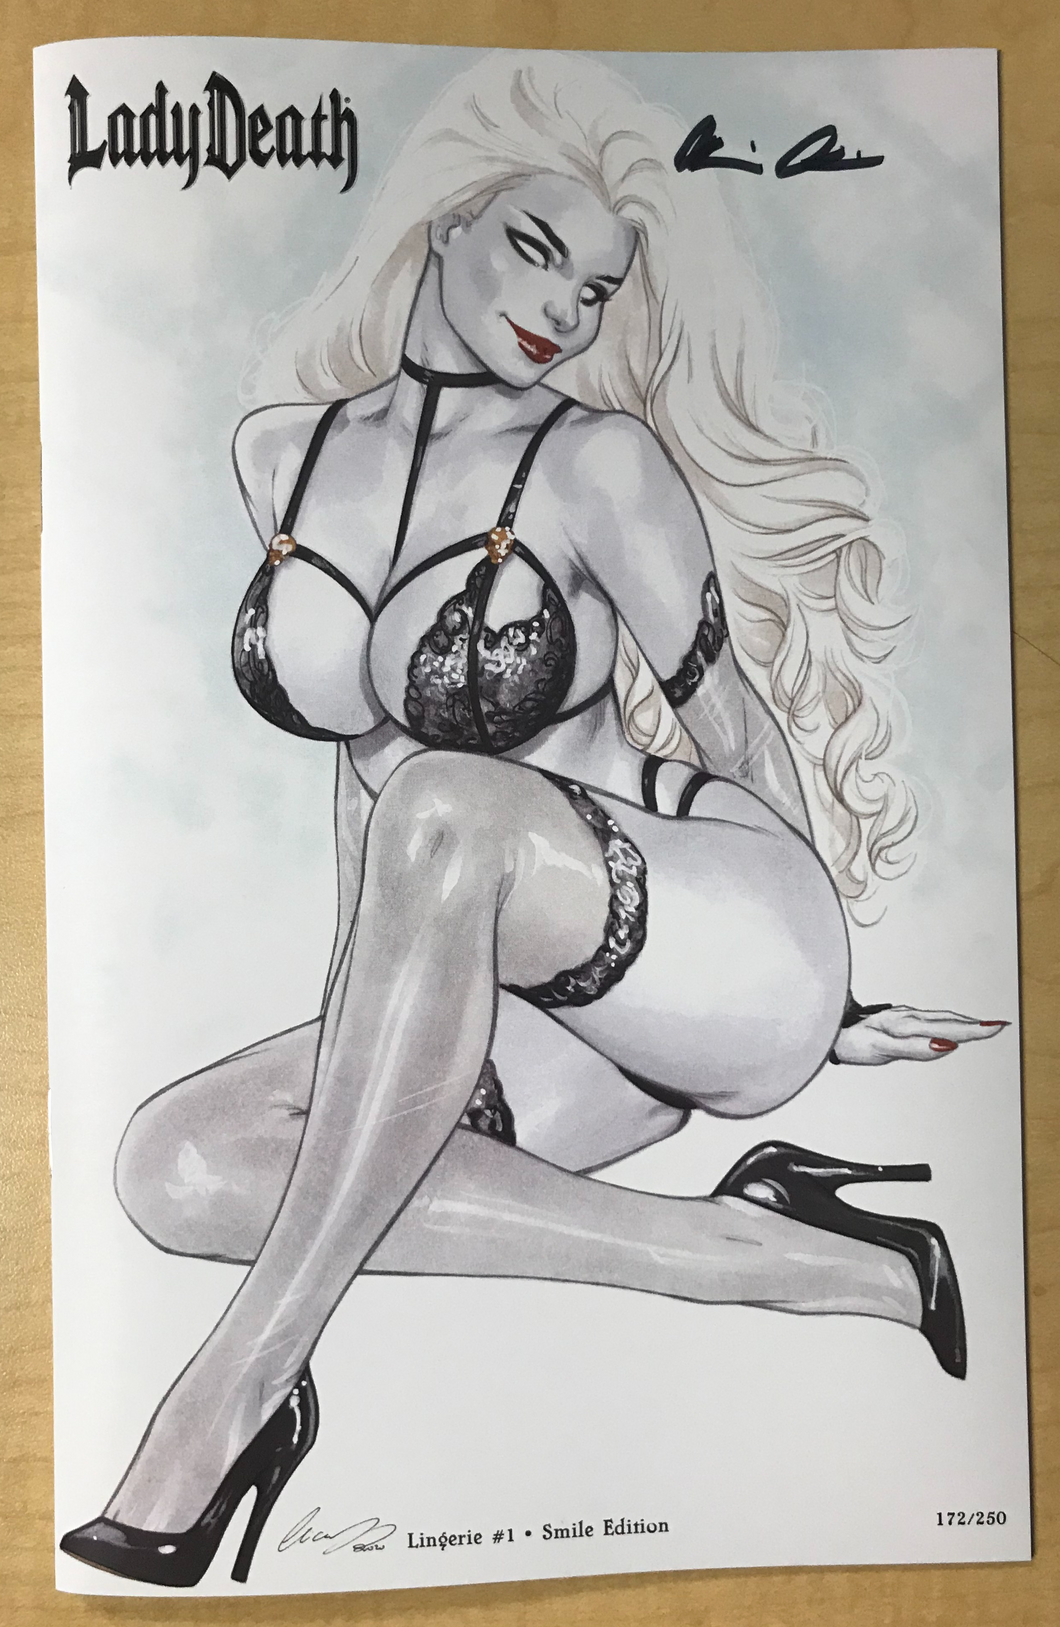 Lady Death: Lingerie #1 Pin Up Book SMILE Edition Variant Cover by Elias Chatzoudis Signed by Brian Pulido w/ COA Limited to 250 Copies!!!